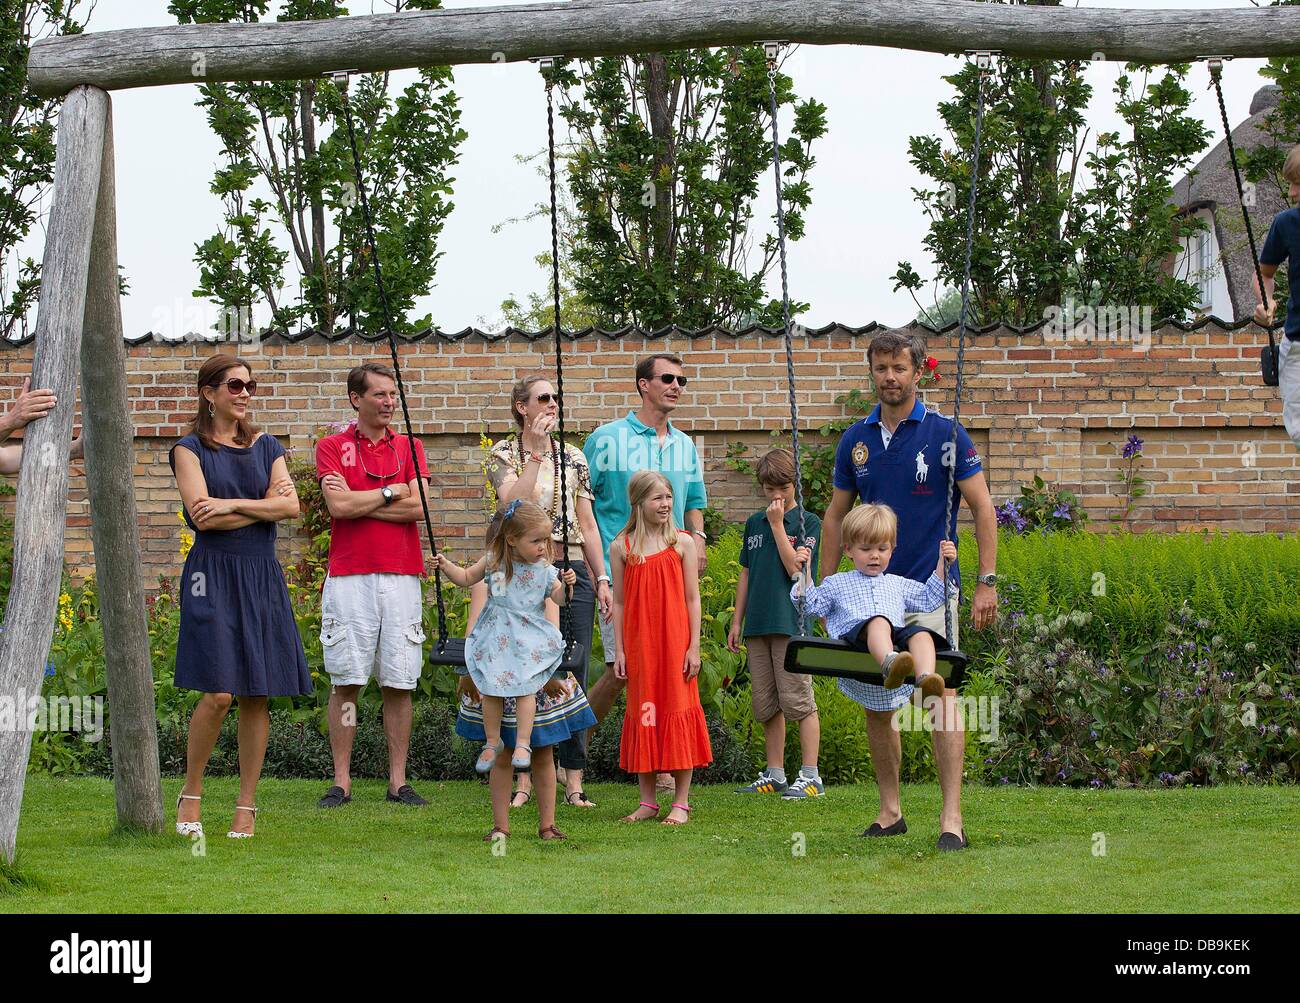 Grasten Palace, Denmark. 26th July, 2013. Pfeil and Klein-Ellguth, Countess Alexandra, Prince Joachim, Prince Felix and Crown Prince Frederik, (back, L-R) Princess Josephine, Princess Isabella (behind her), Countess Ingrid and Prince Vincent of Denmark pose for the media at Grasten Palace (Denmark). 26th July, 2013. Princess Mary (back, L-R), Jefferson Count of Pfeil and Klein-Ellguth, Countess Alexandra, Prince Joachim, Prince Felix and Crown Prince Frederik, (back, L-R) Princess Josephine, Princess Isabella (behind her), Countess Ingrid and Prince Vincent of Denmark pose for the media at ... Stock Photo